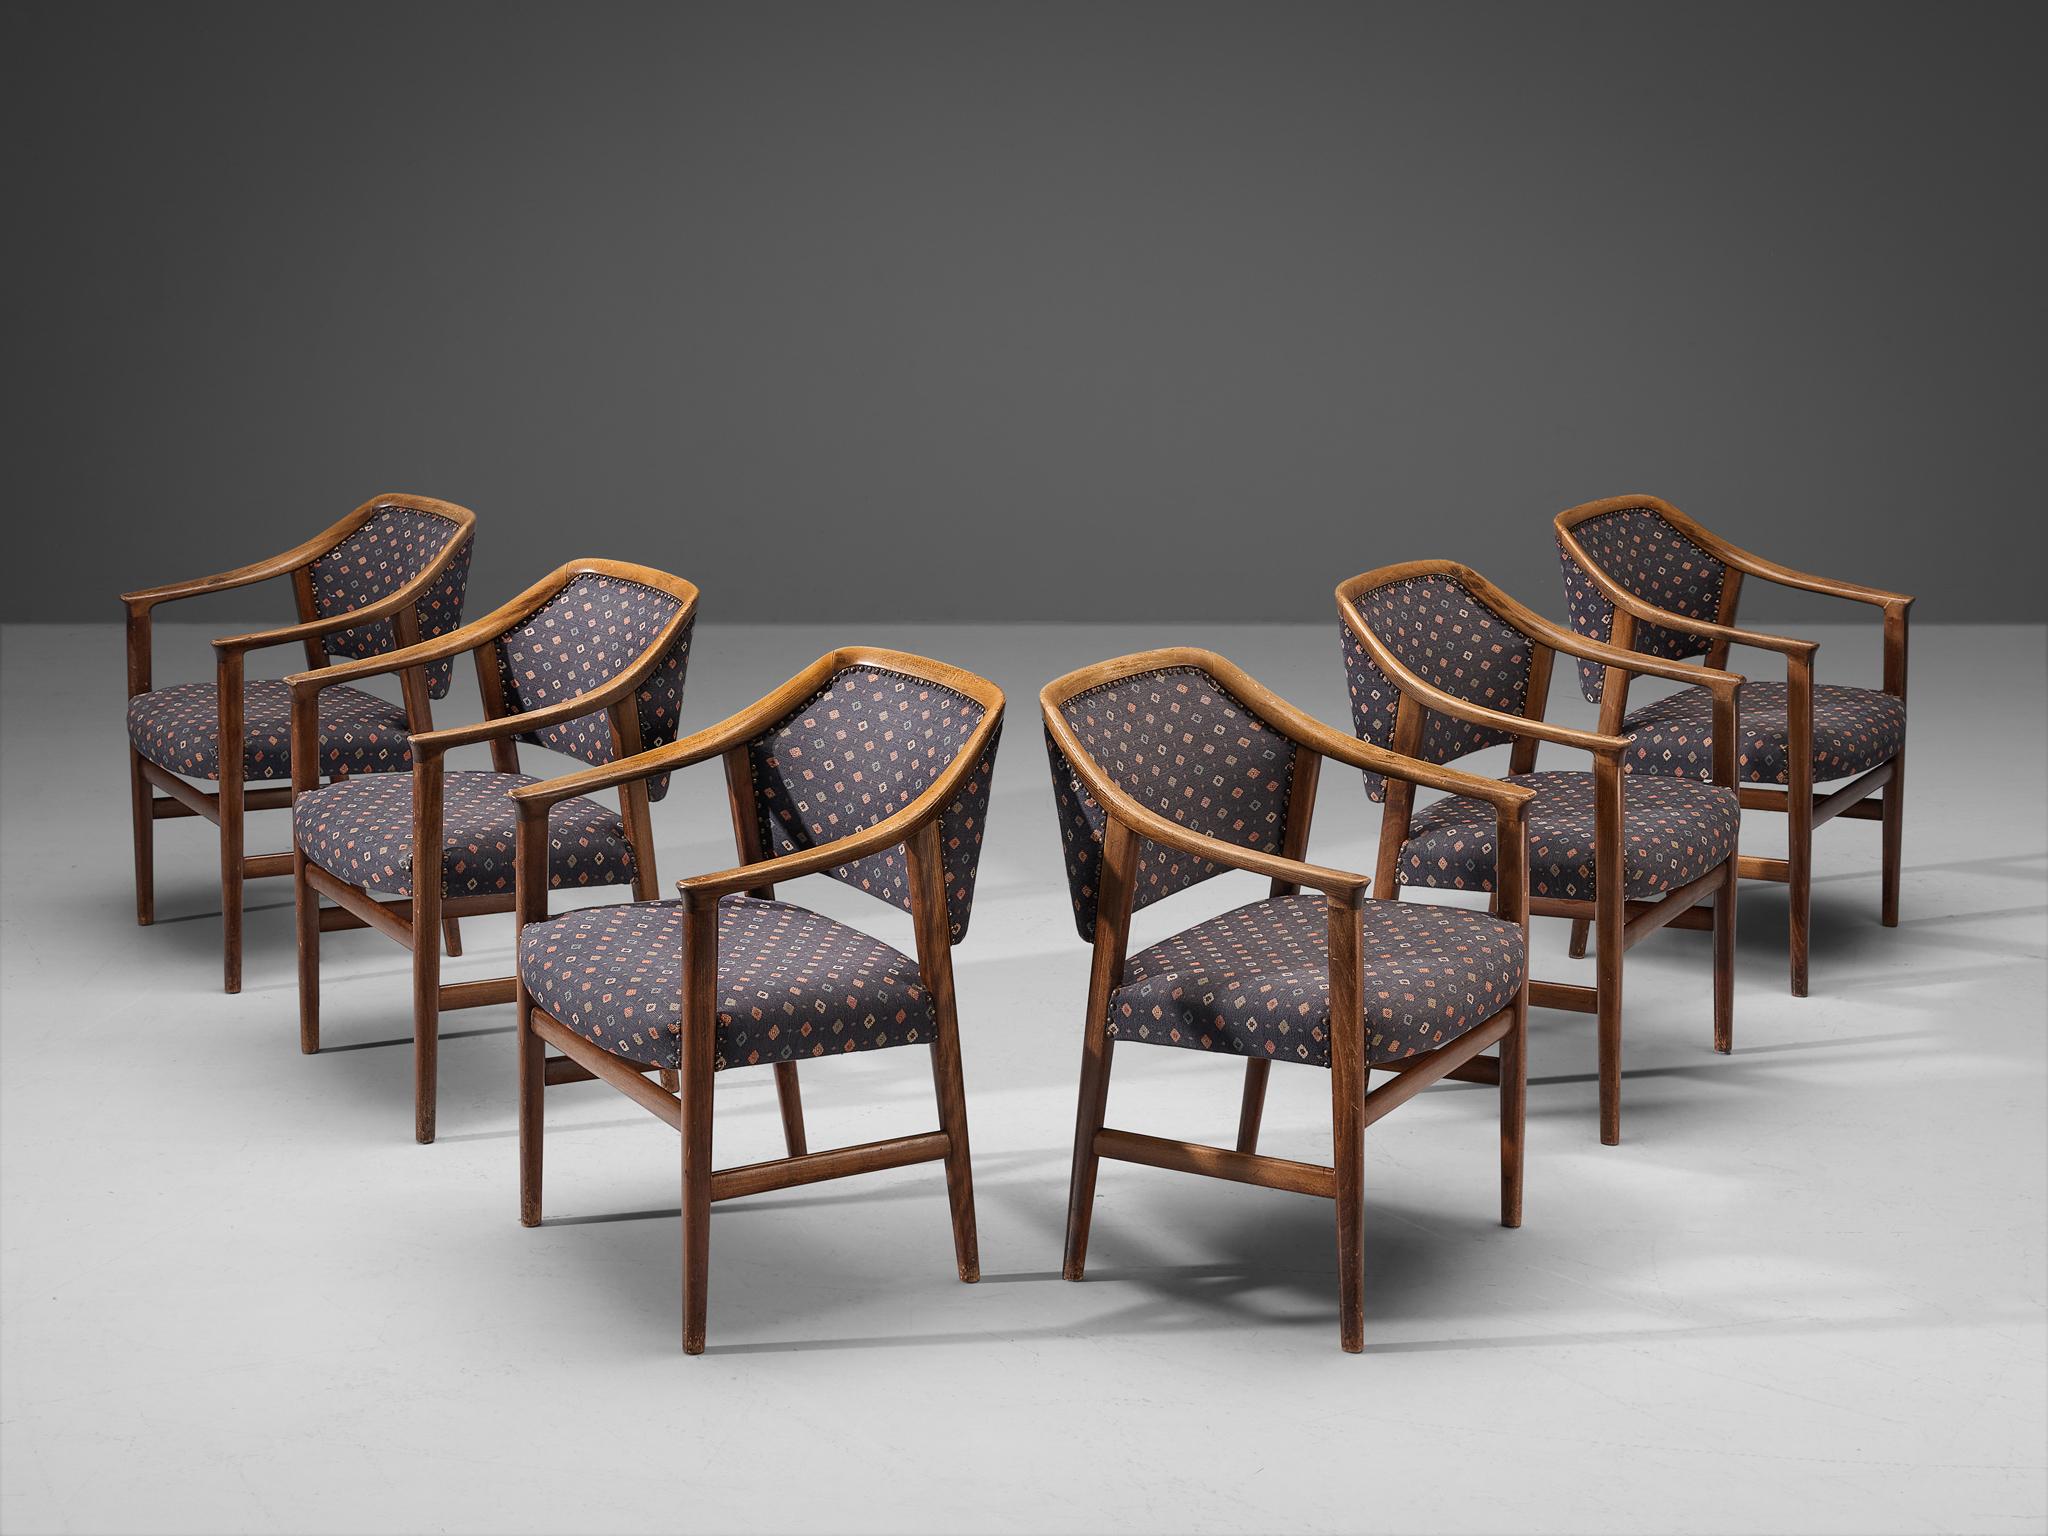 Set of six dining chairs, fabric, beech, metal, Italy 1960s

These beautifully constructed armchairs feature an open and clear patinated wooden frame based on simplistic forms. A nice detail is how the back elegantly runs over into the armrests,